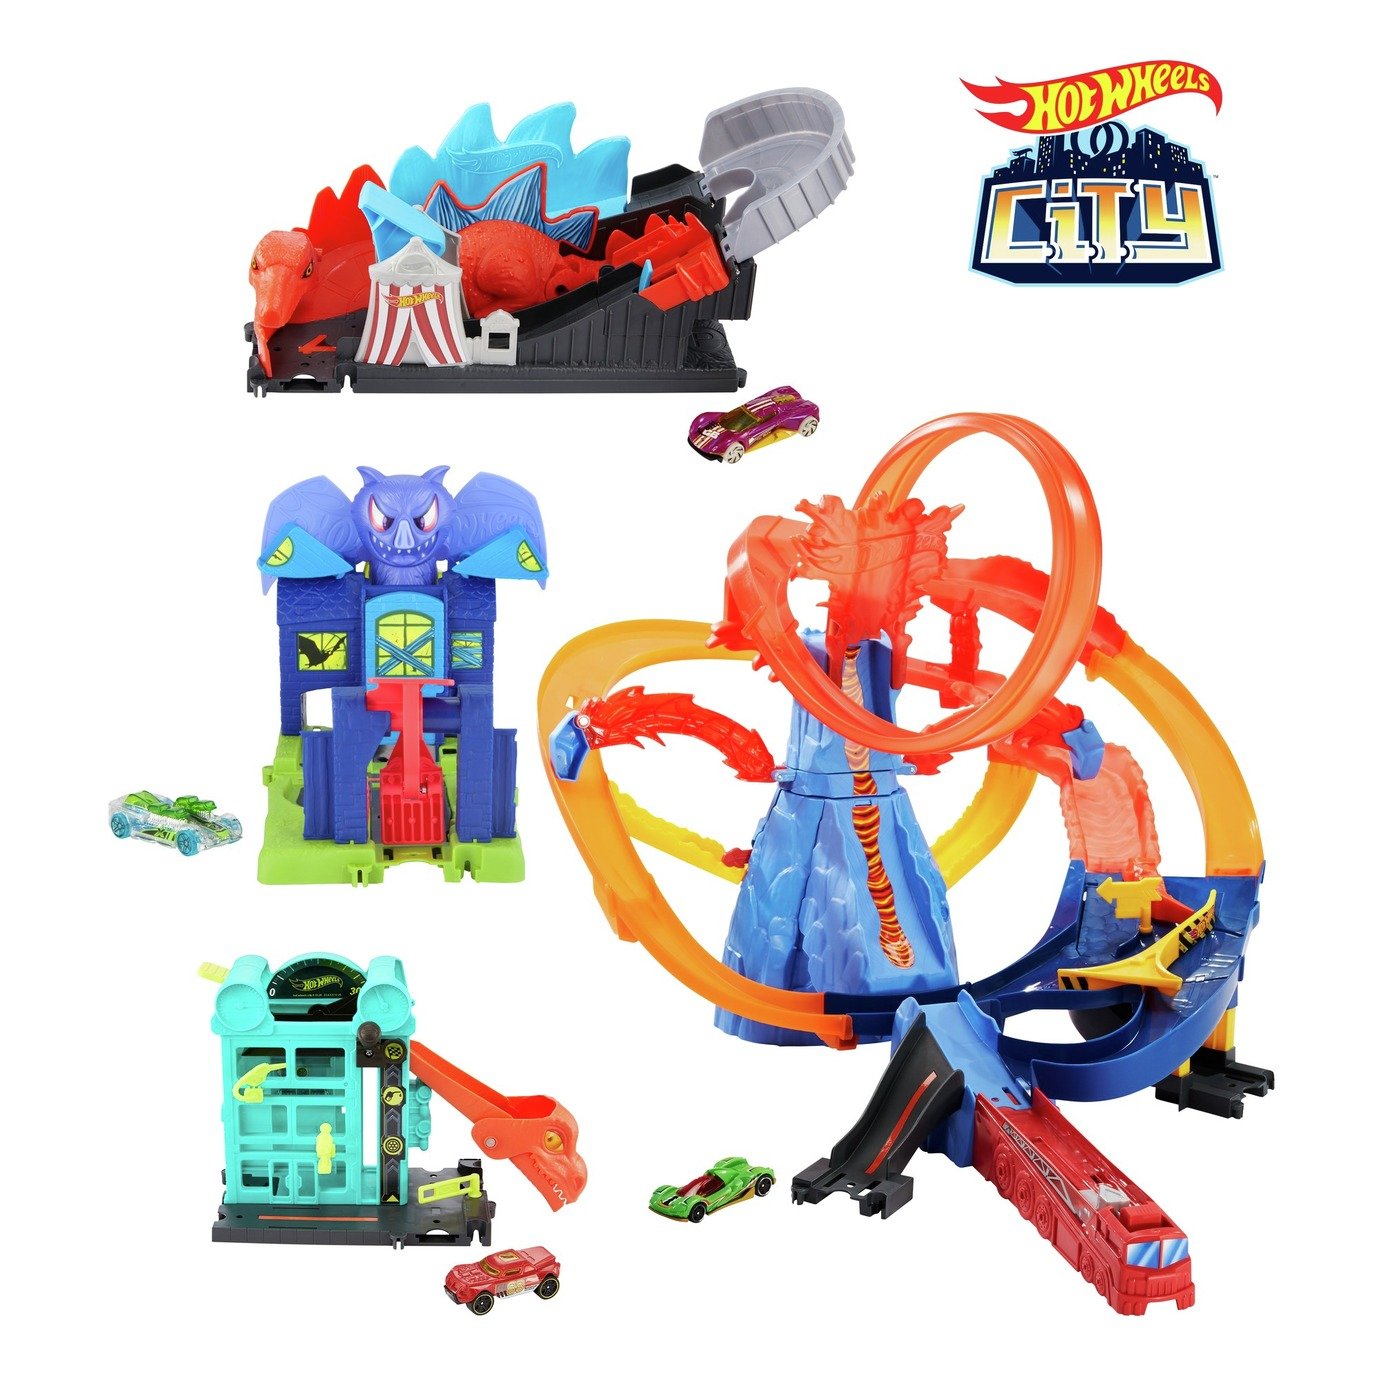 Hot Wheels Ultimate City Track Set review